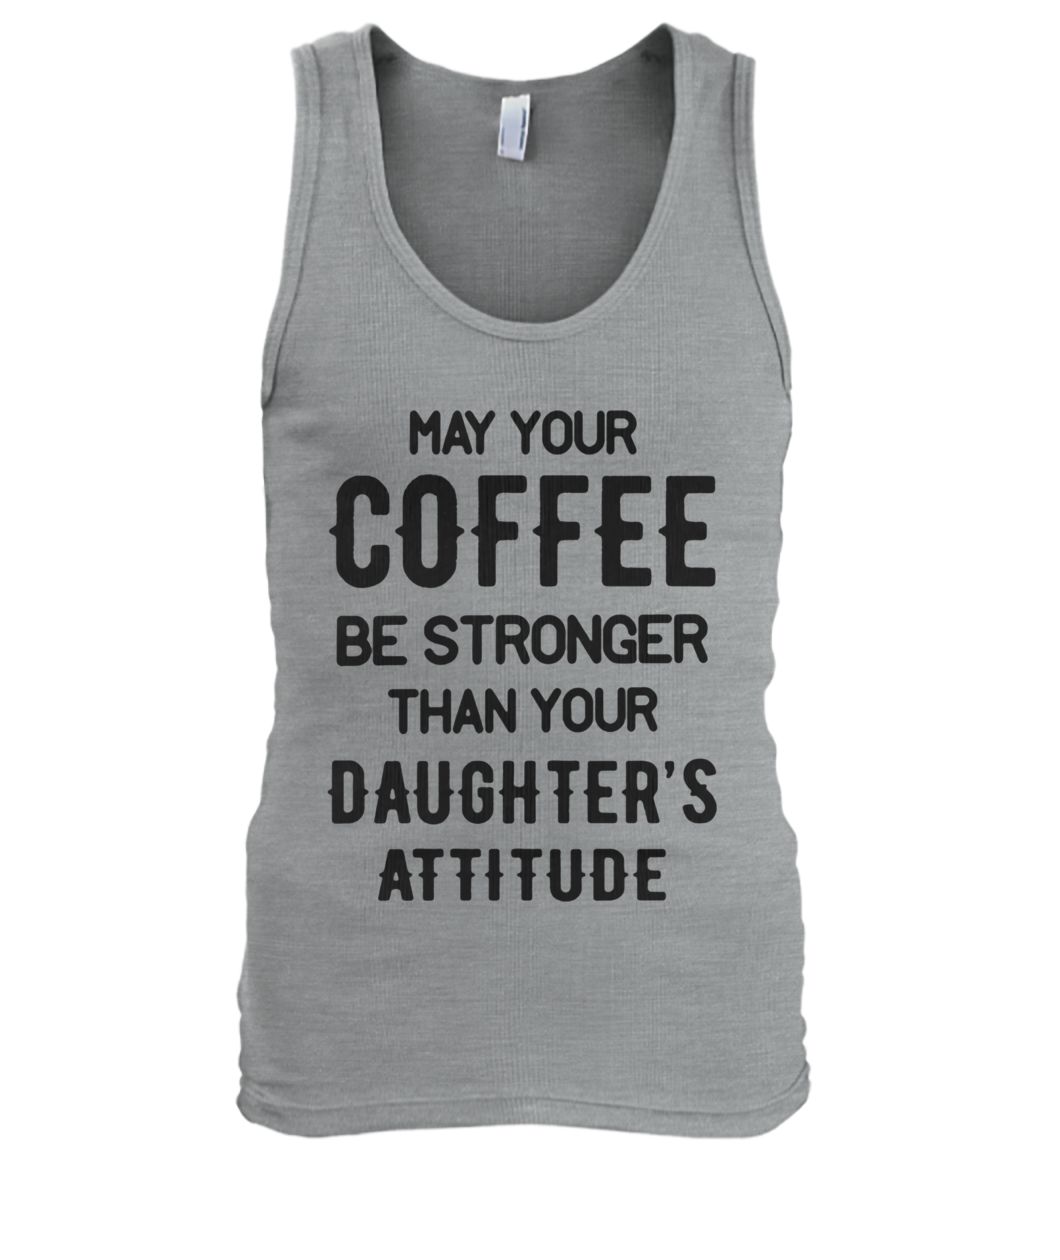 May your coffee be stronger than your daughter's attitude men's tank top